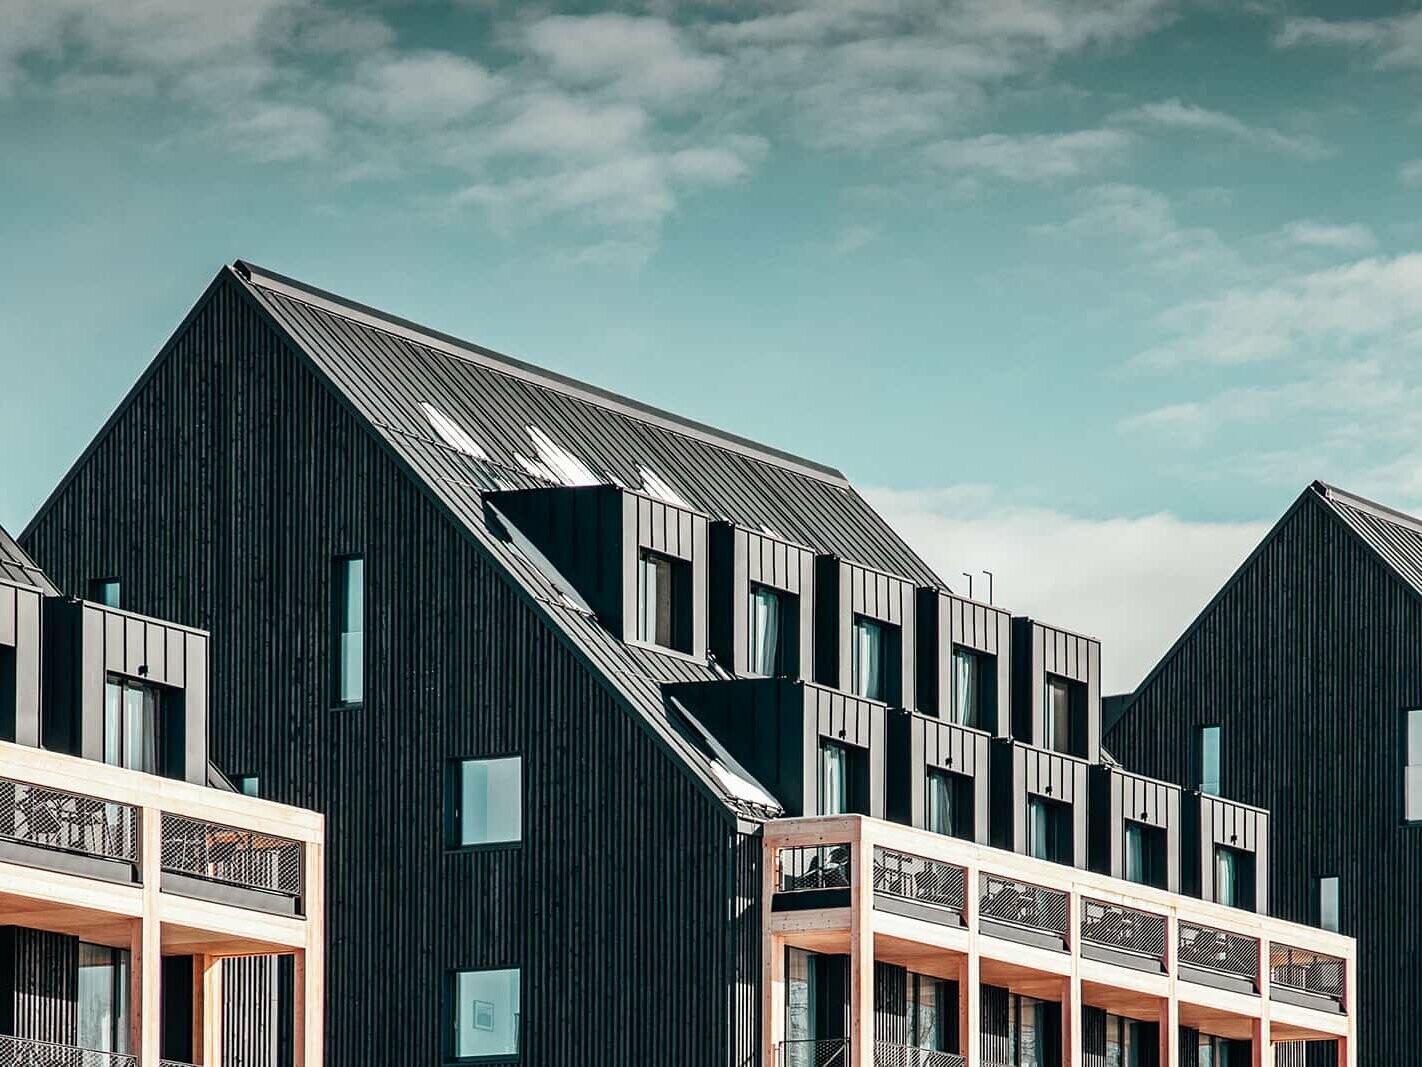 You can see the Demänová Apartments in lateral view, which are covered in Prefalz roof system in the colour anthracite